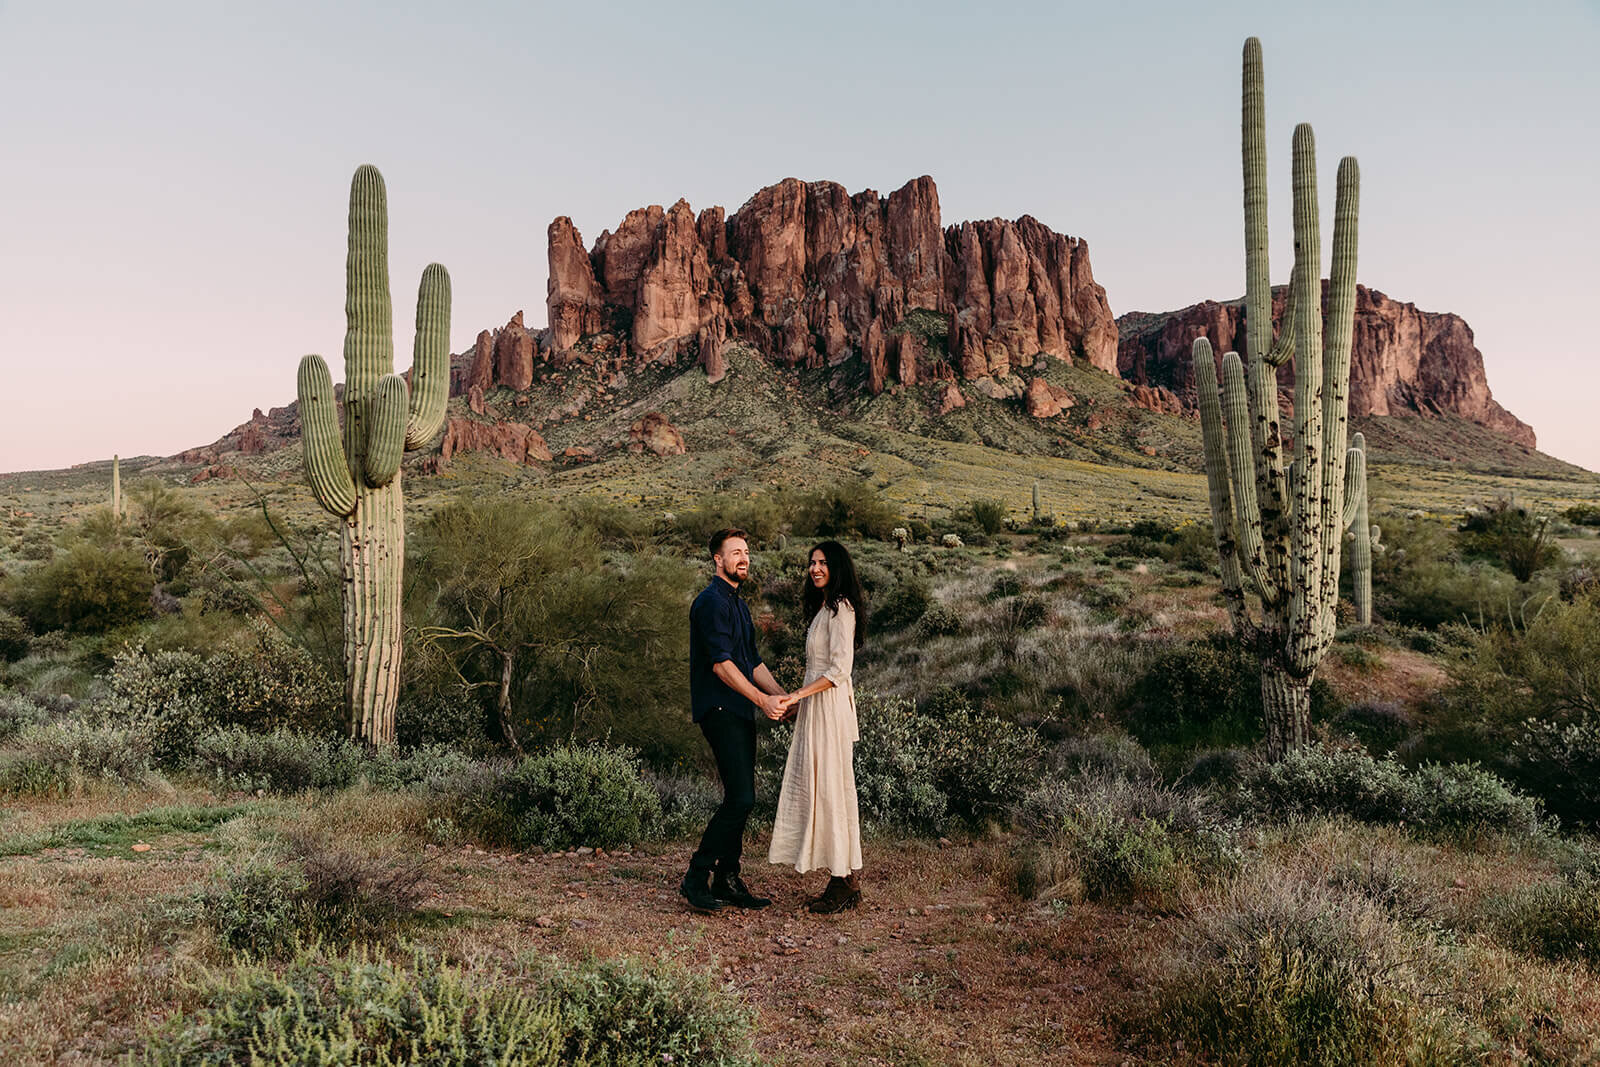  Couple hikes through desert wonderland during sunset during their engagement session in the Superstition Mountains outside of Phoenix, Arizona. Phoenix elopement photographer 